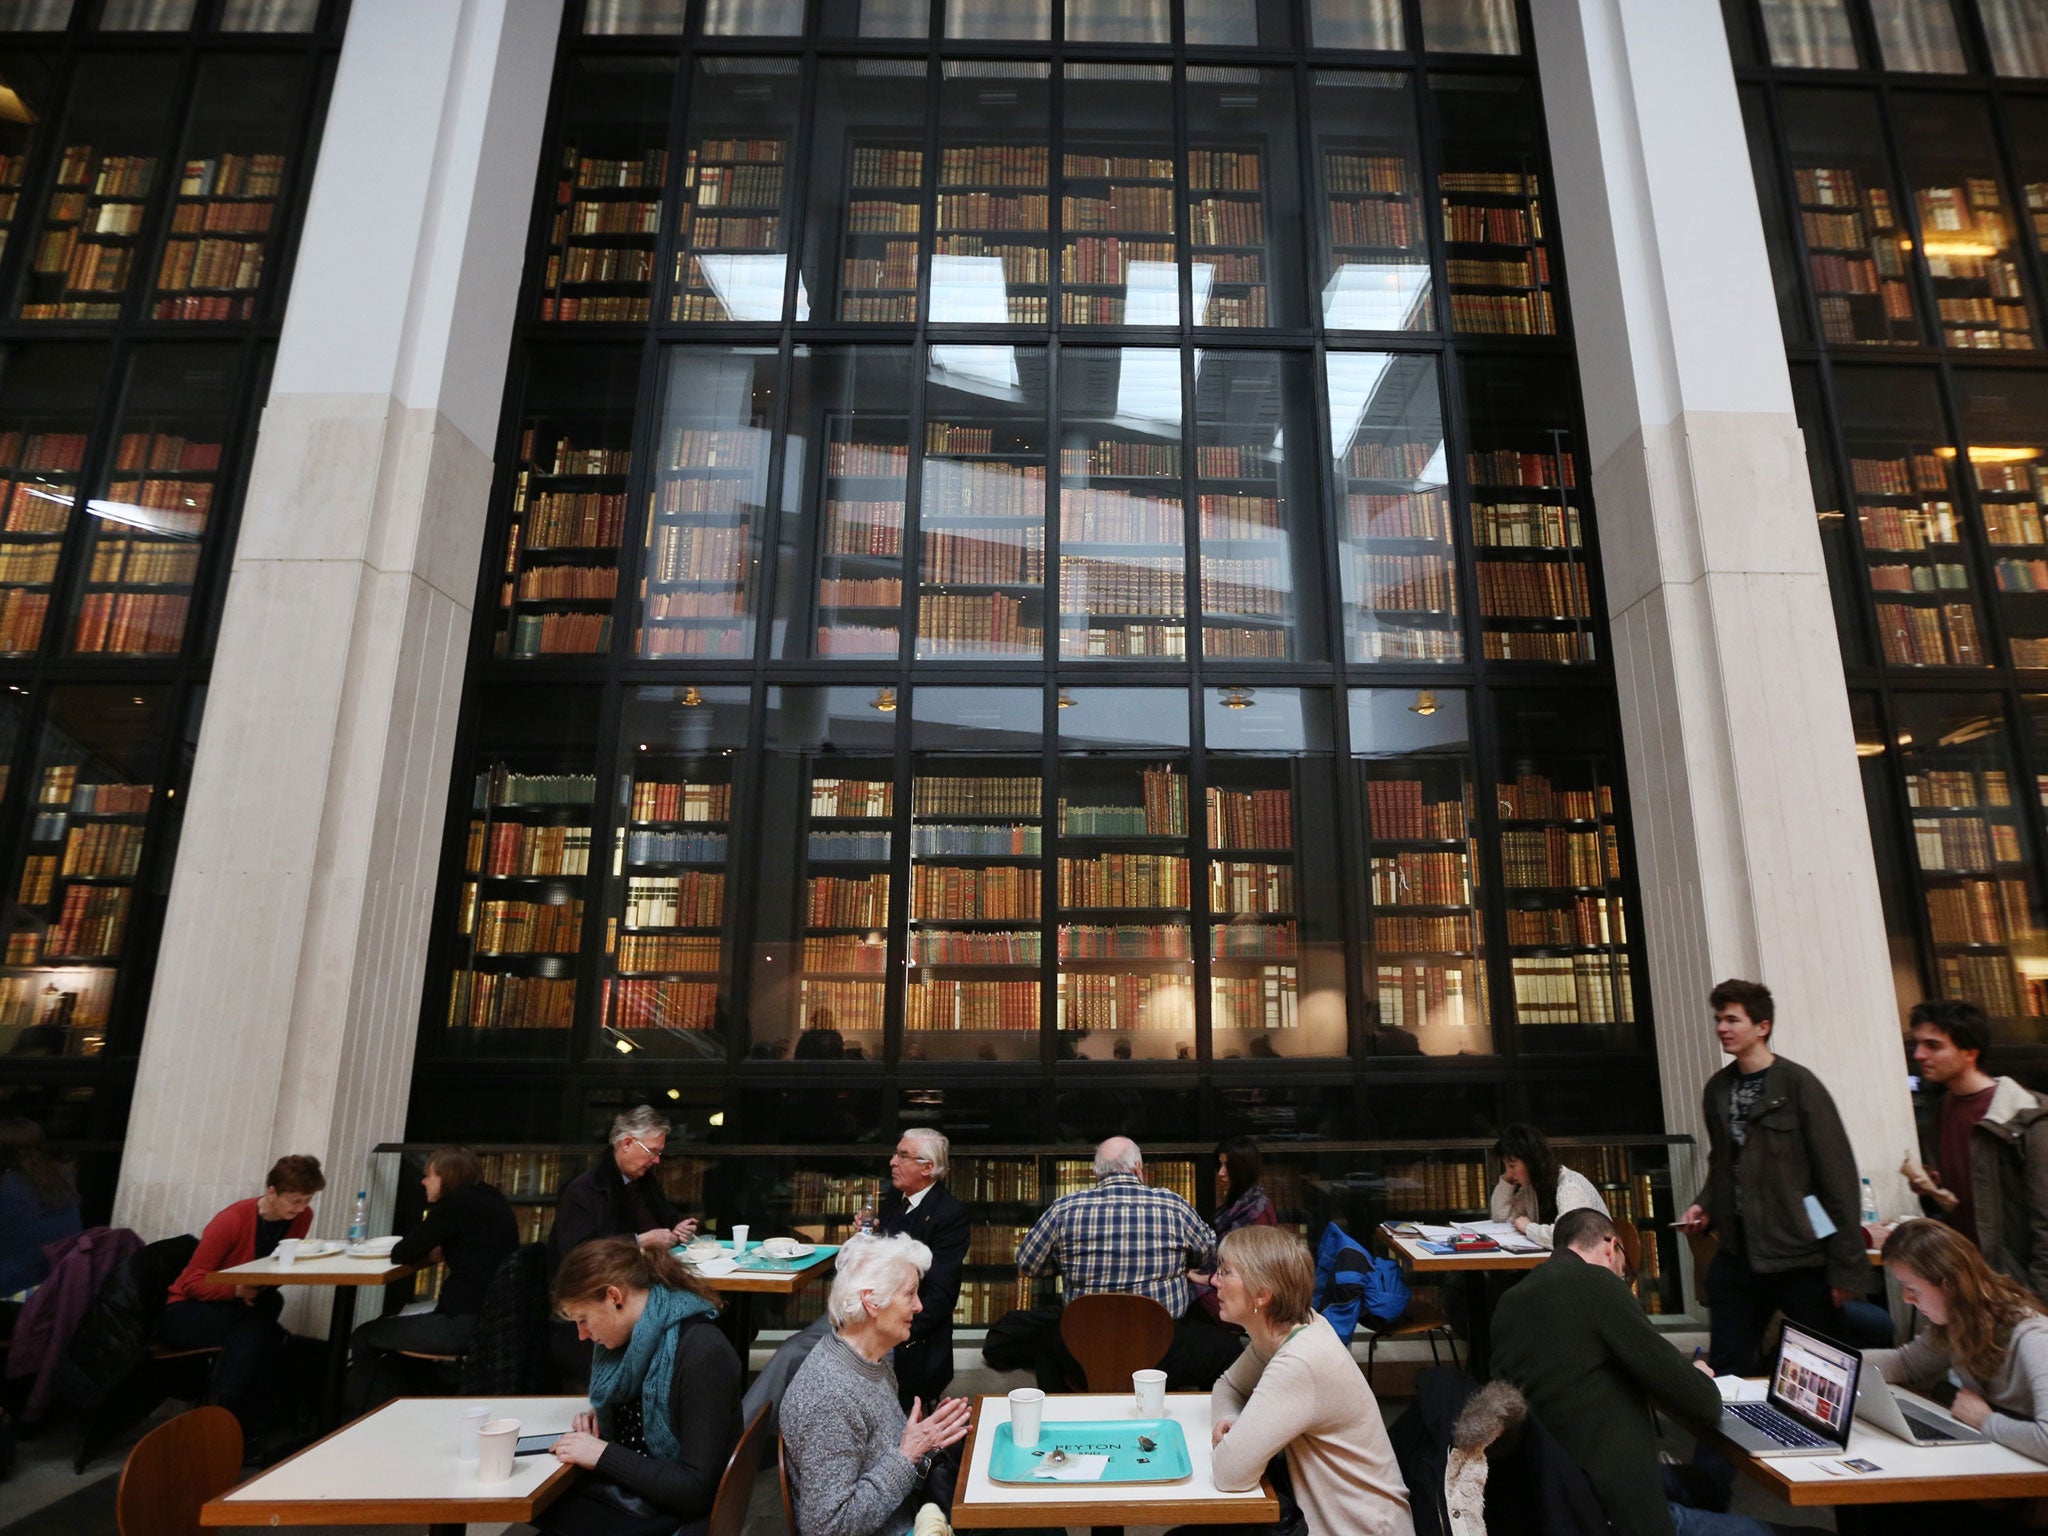 Visitors enjoy the cafe at The British Library